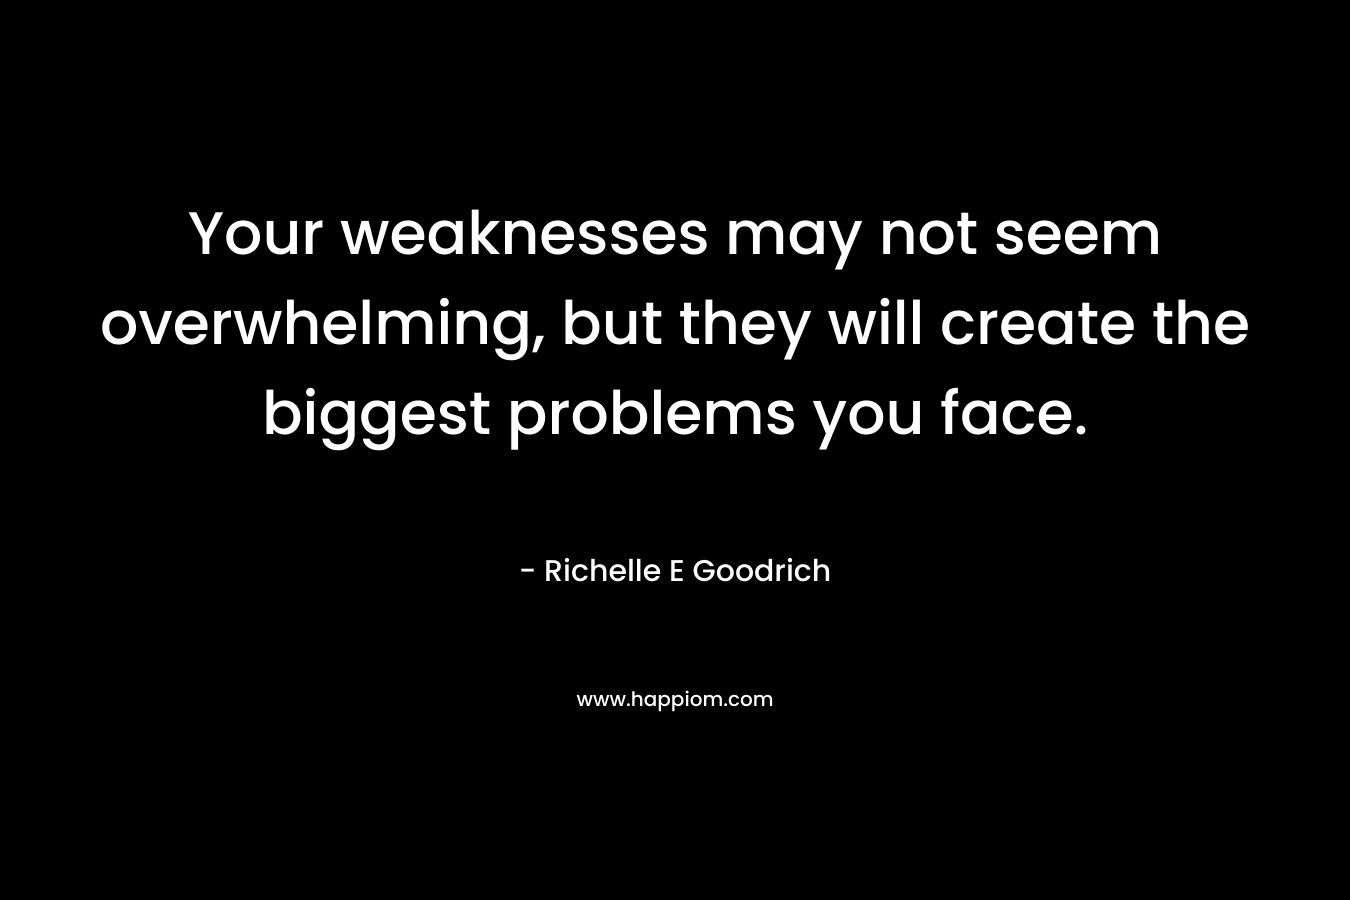 Your weaknesses may not seem overwhelming, but they will create the biggest problems you face.